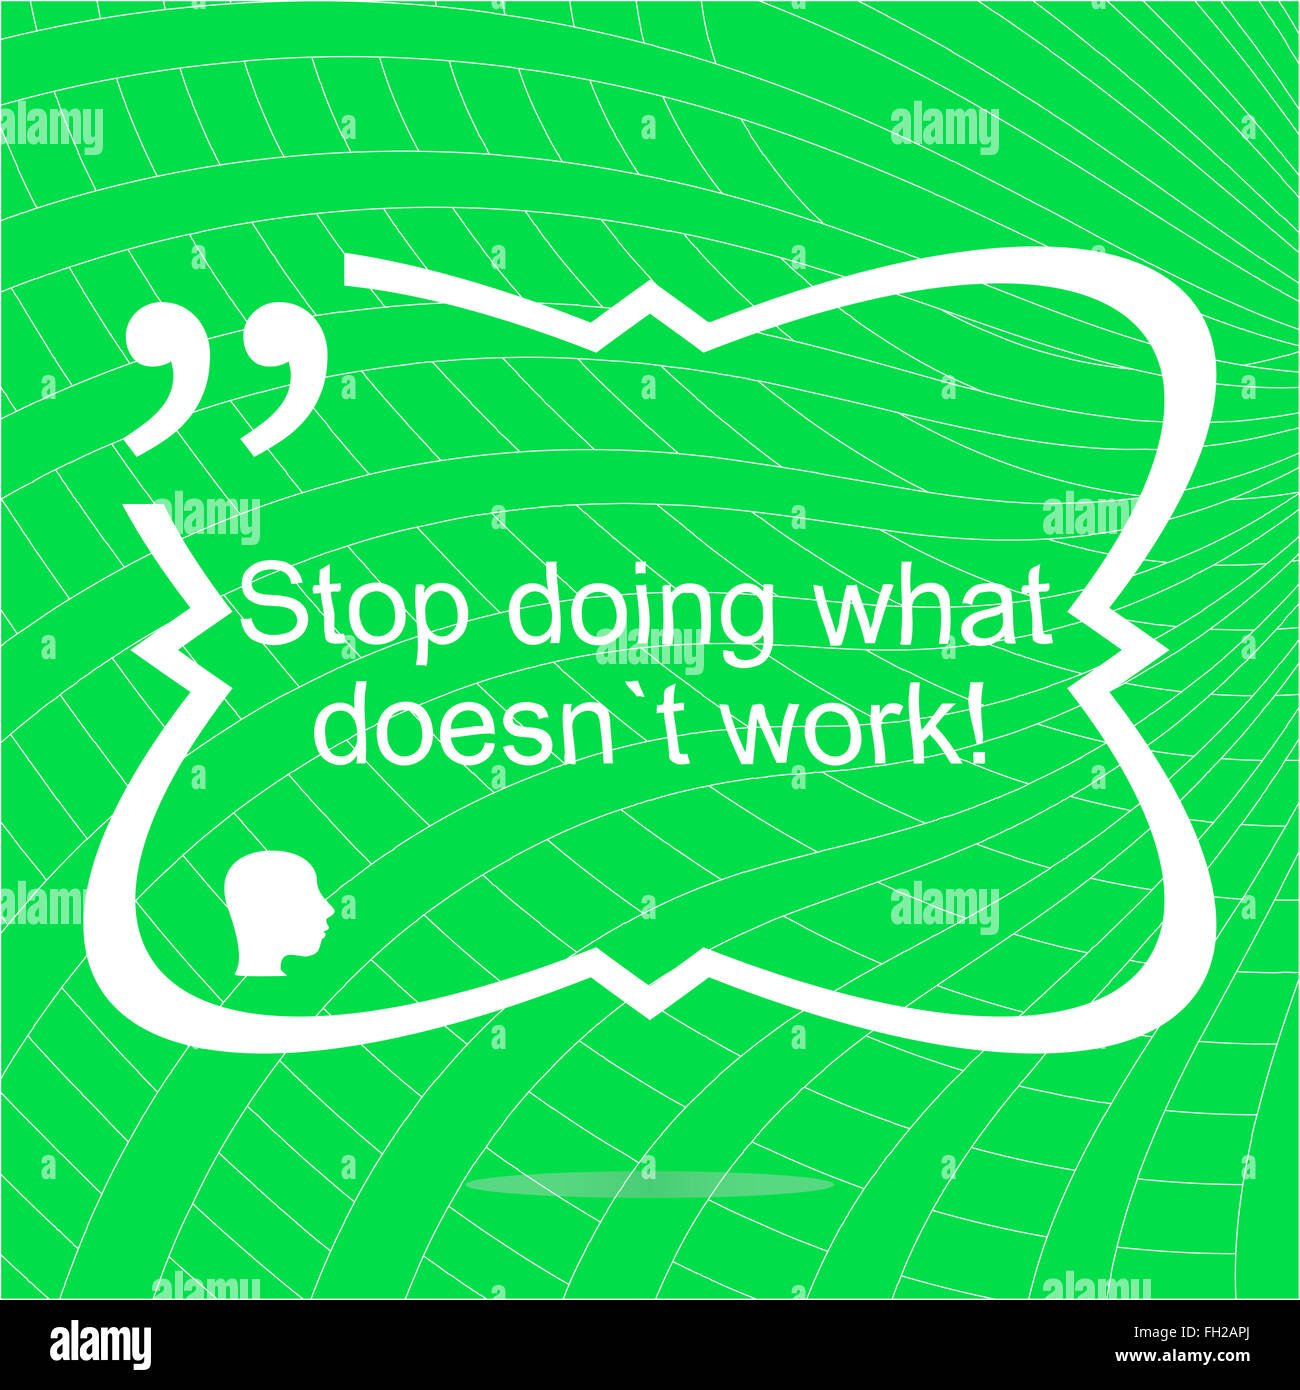 Stop doing what doesnt work. Inspirational motivational quote. Simple trendy design. Positive quote Stock Photo